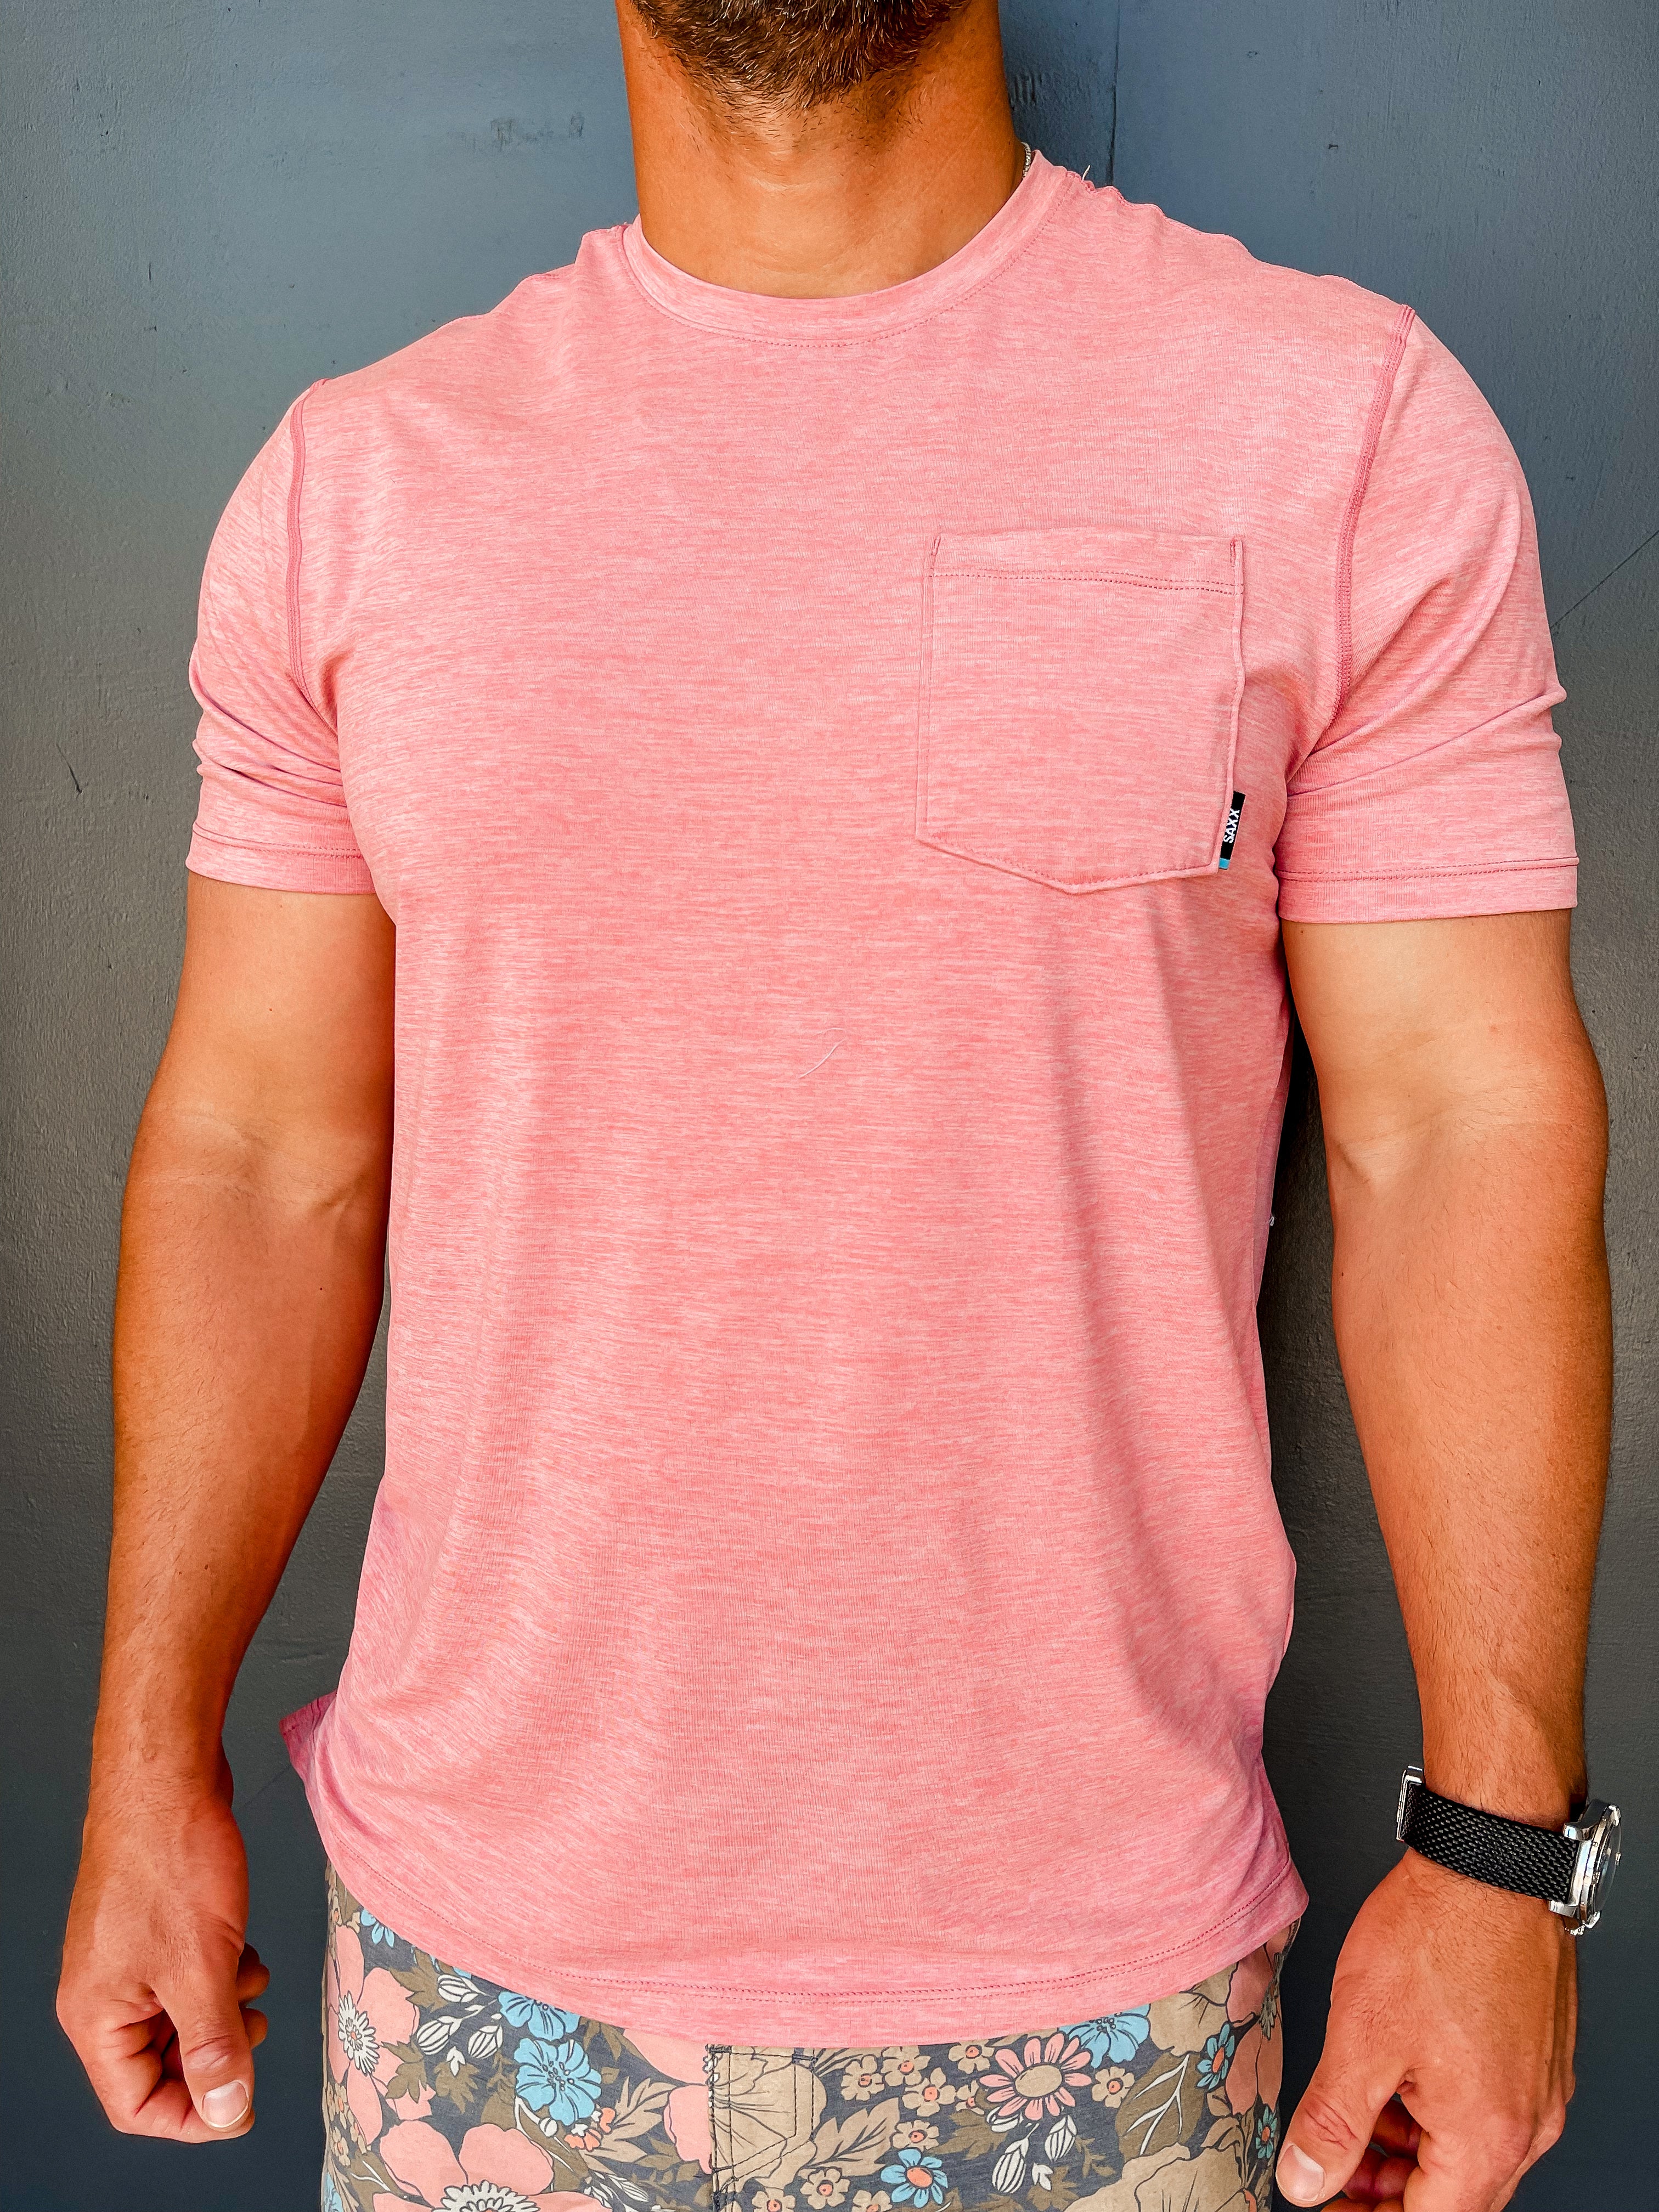 Droptemp All Day Cooling Short Sleeve Pocket Tee - Gumball Heather